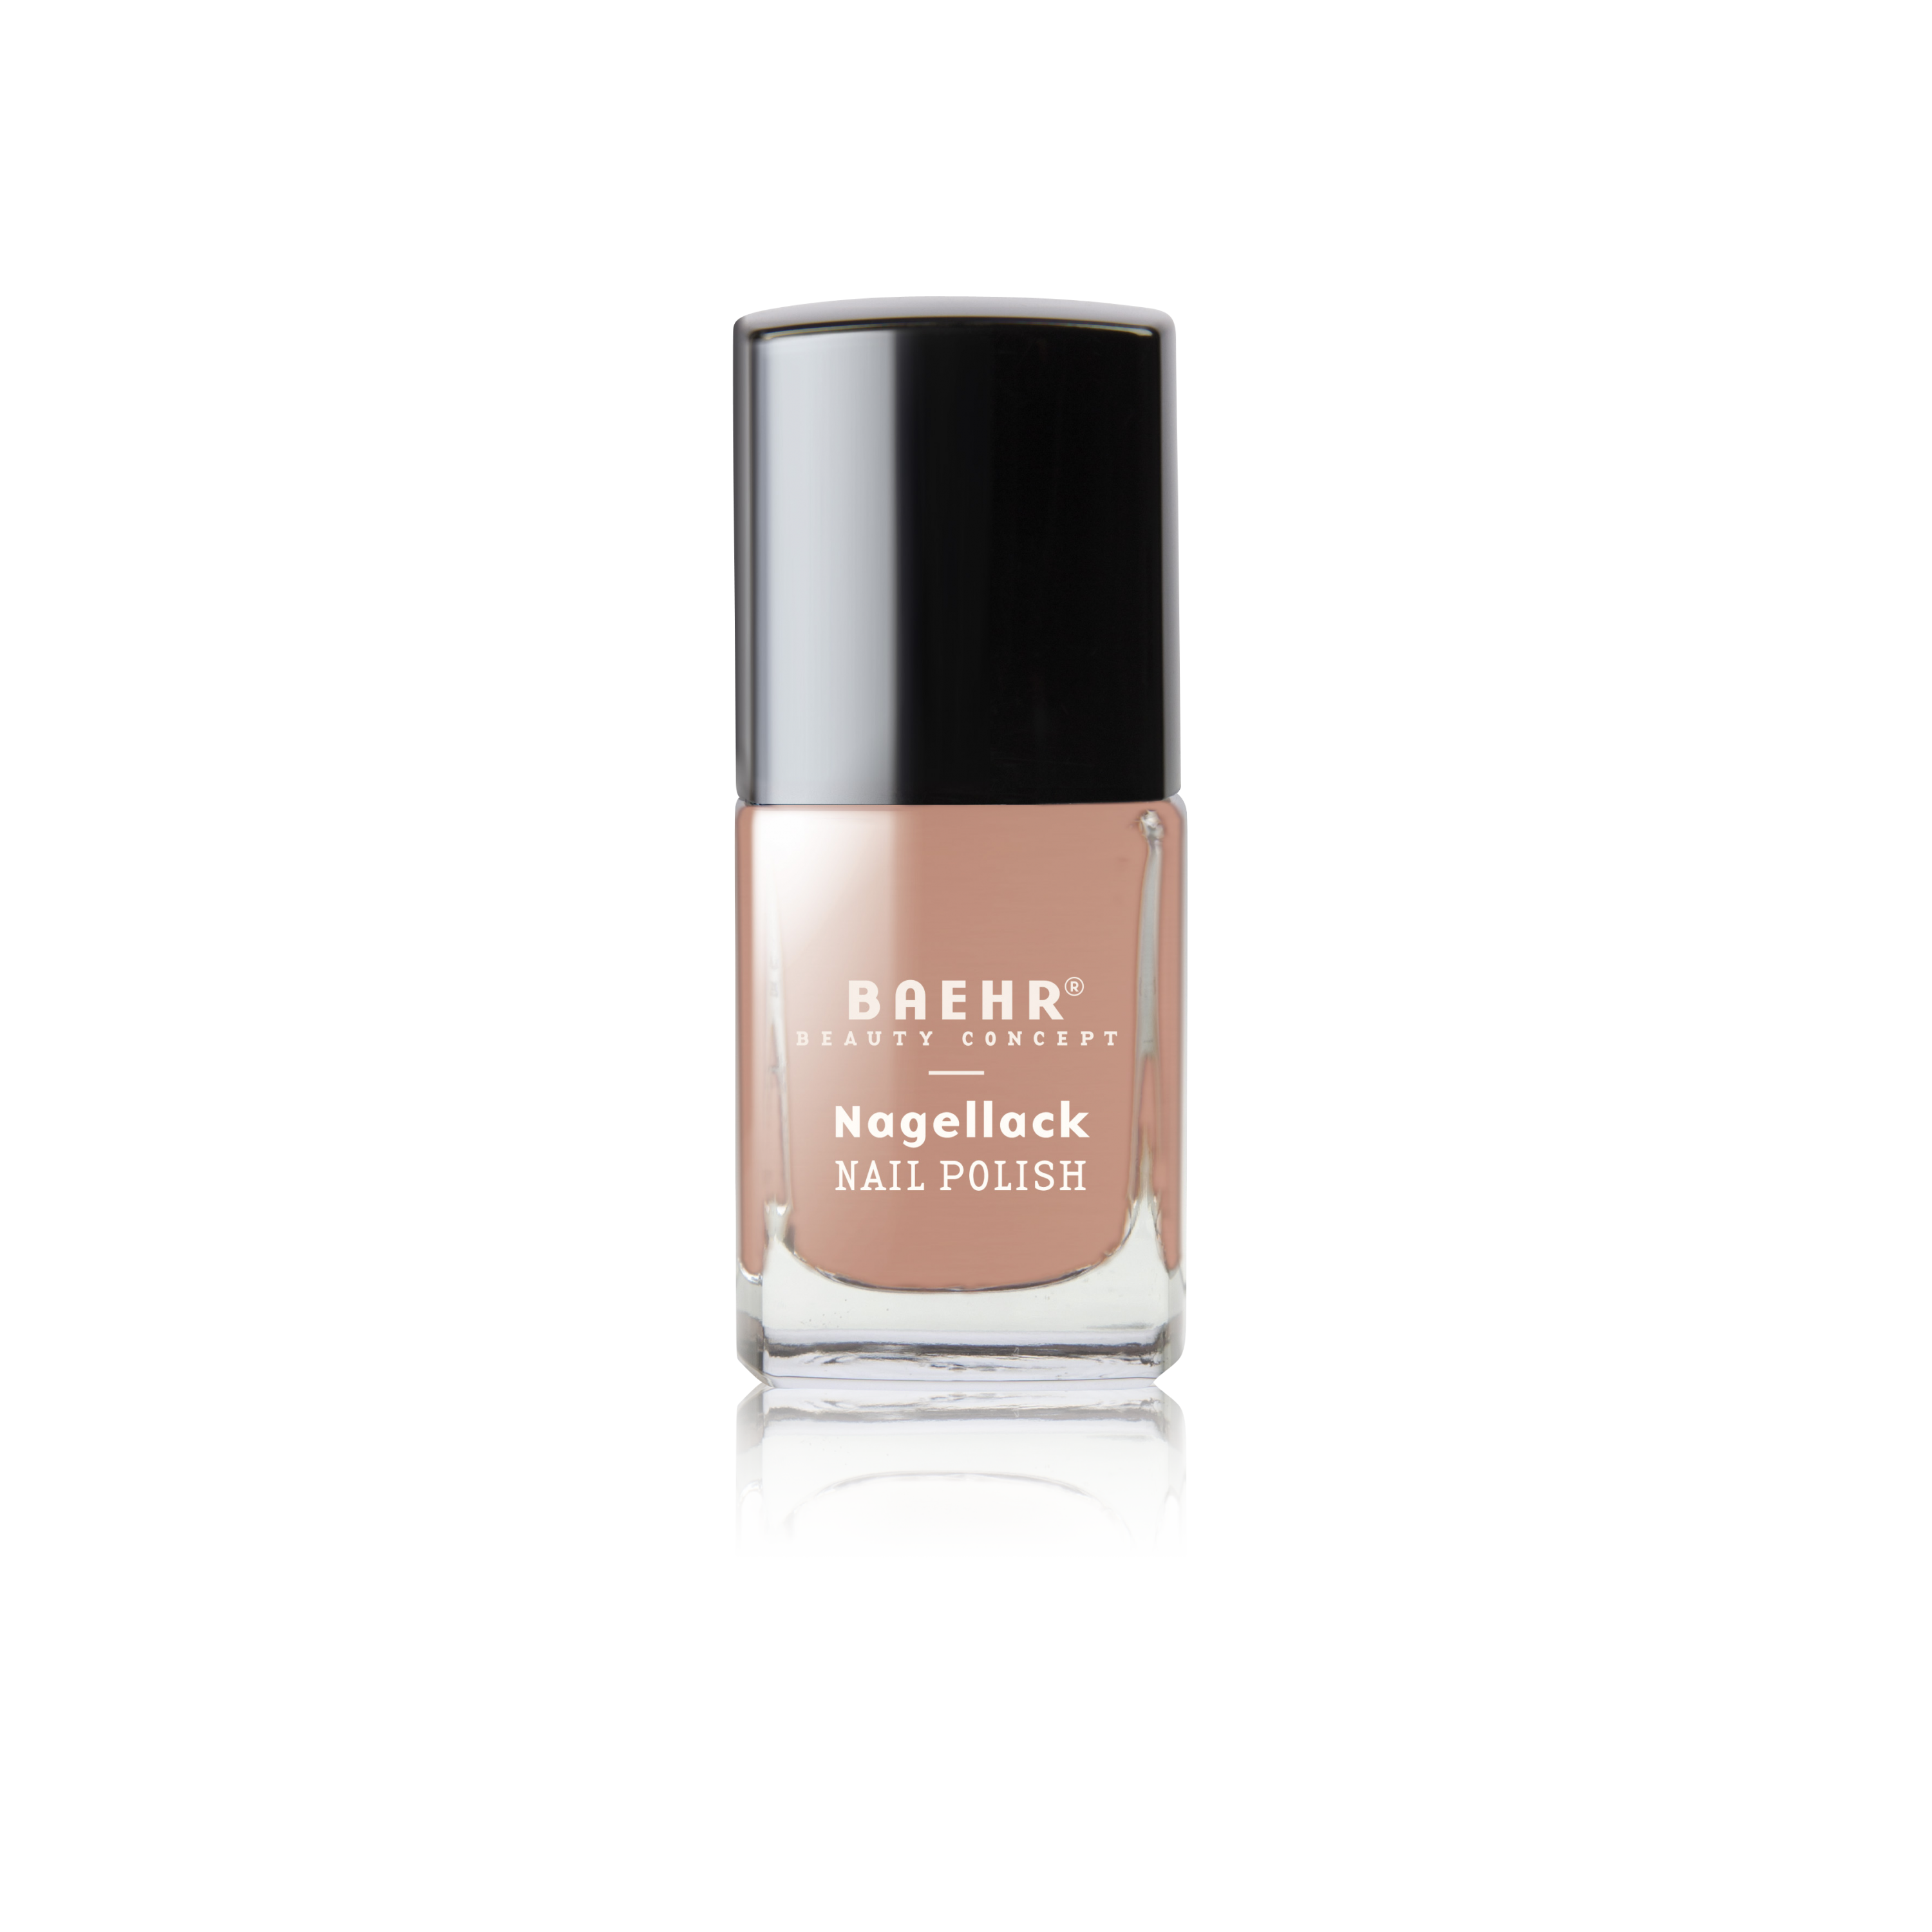 BAEHR BEAUTY CONCEPT - NAILS Nagellack cream soft pastell 11 ml